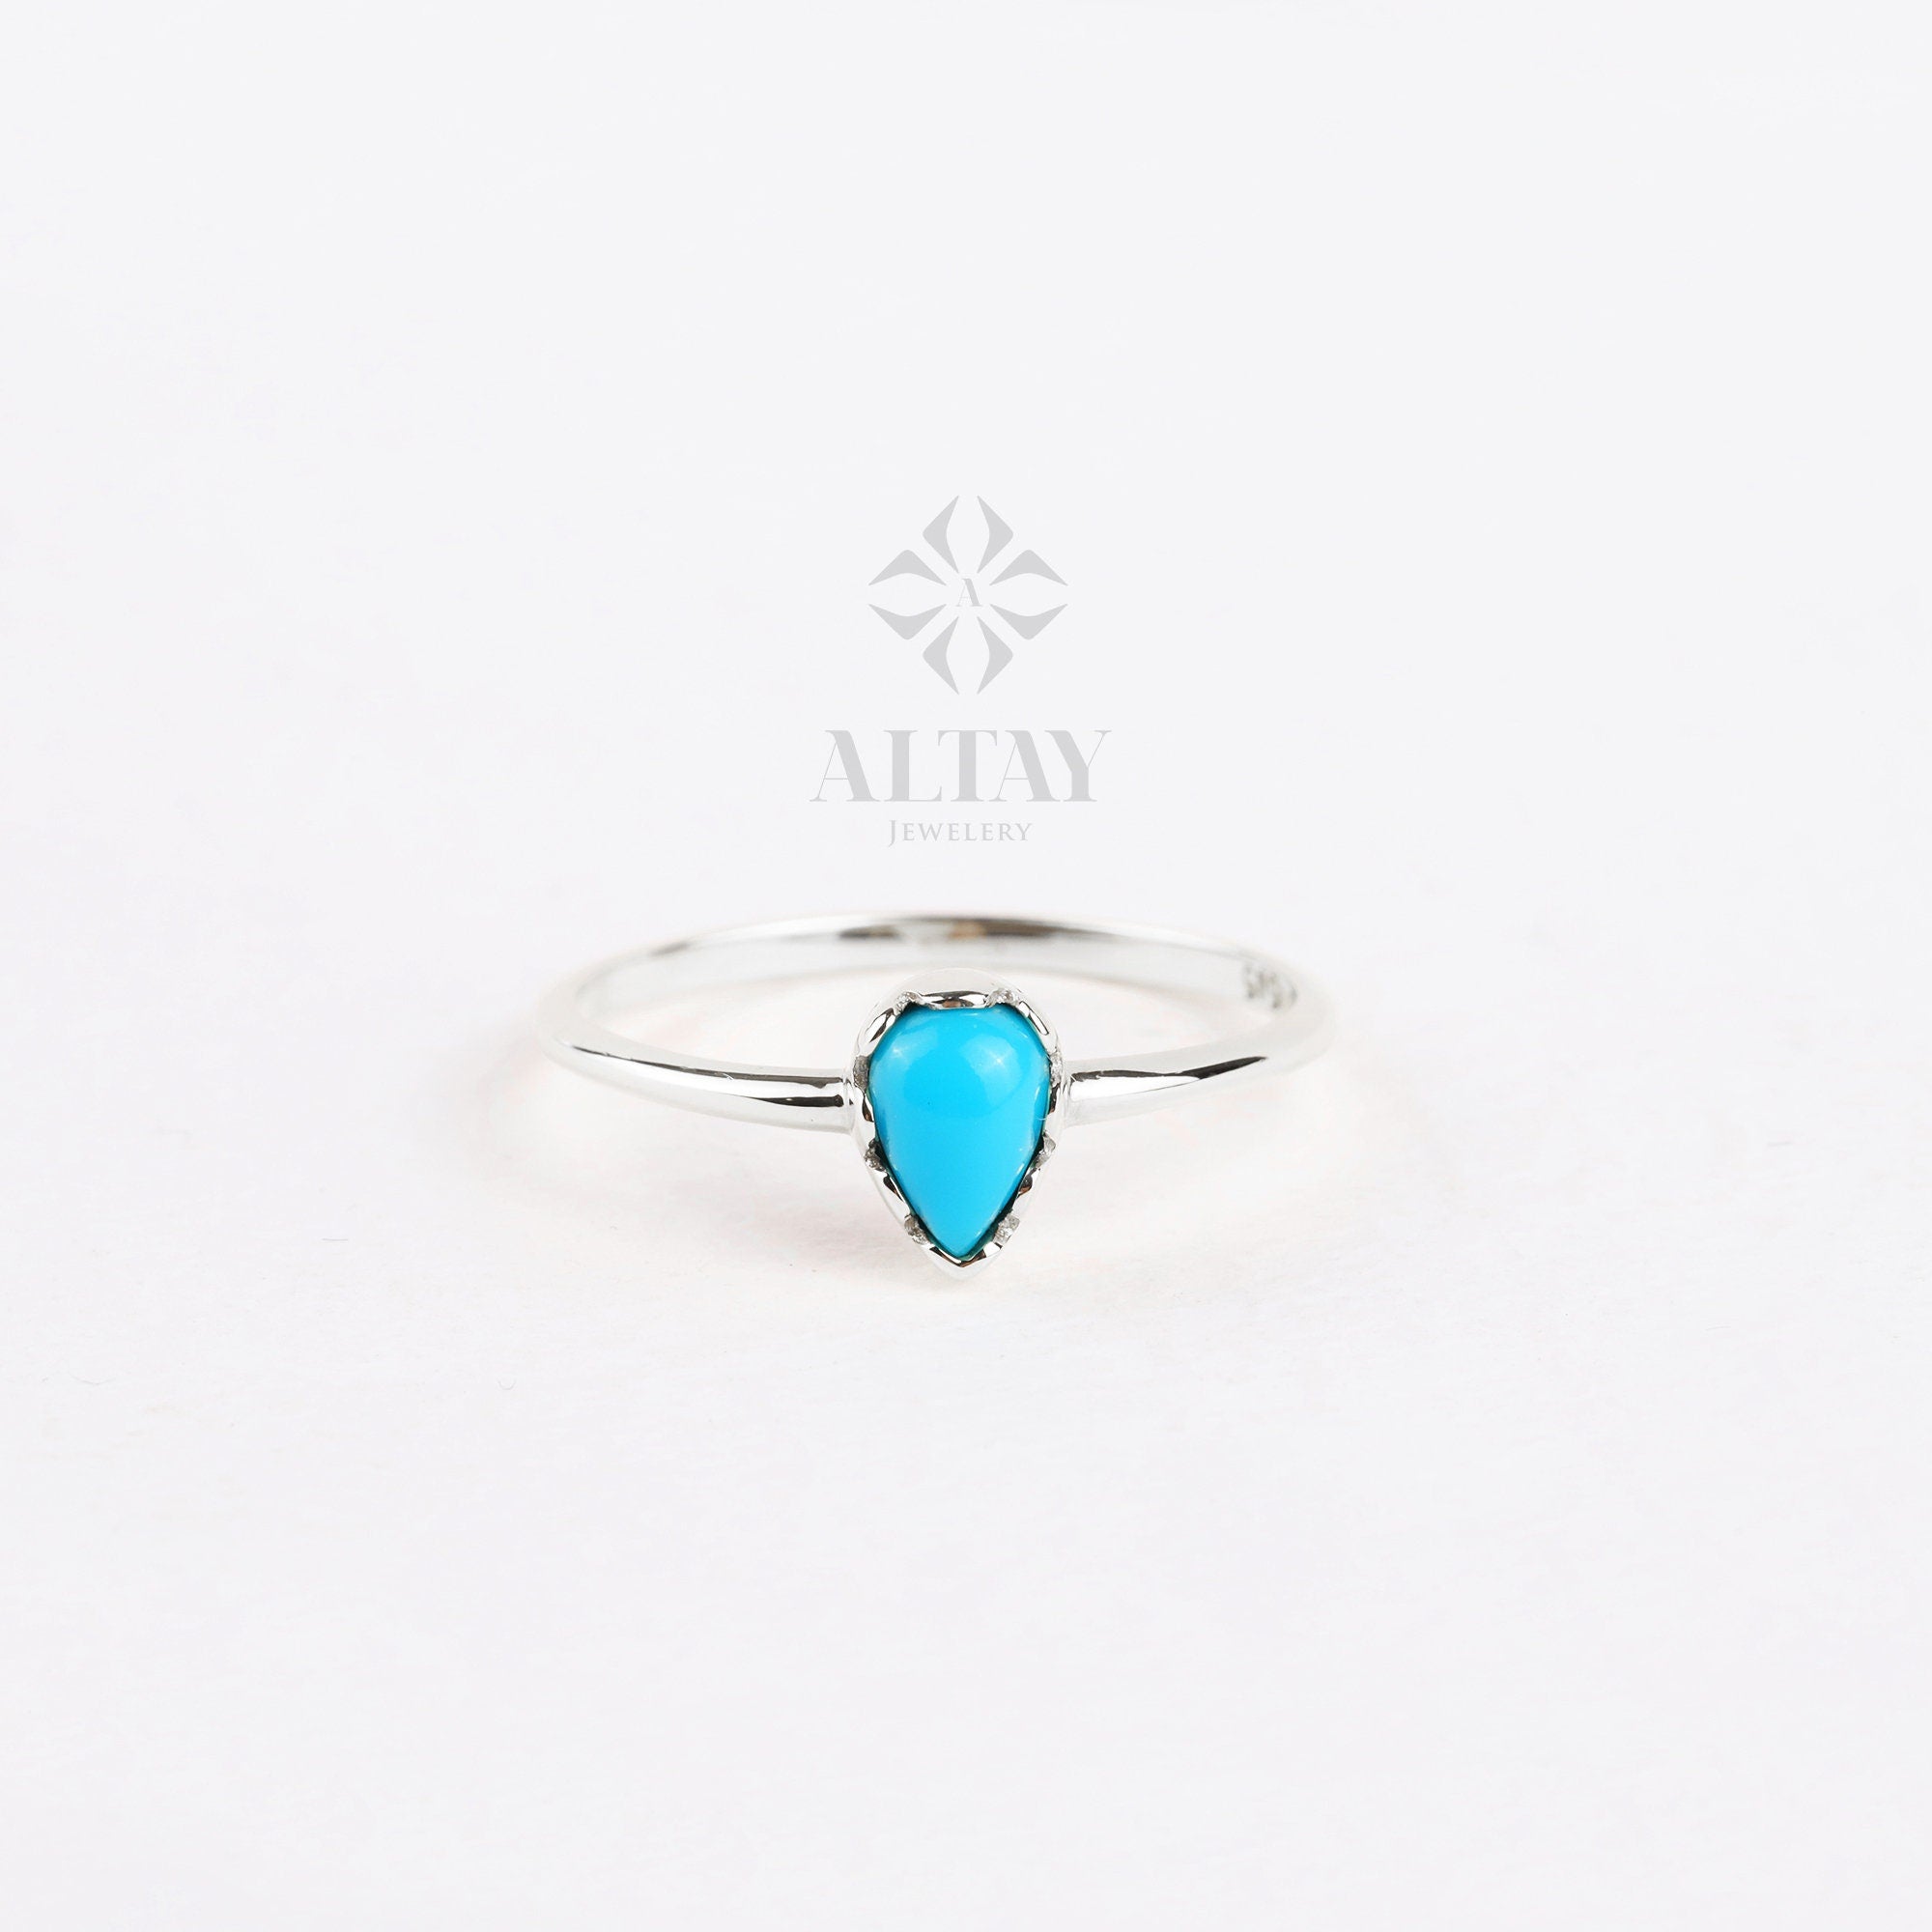 14K Solid Gold Drop Ring, Turquoise Pear Stone Ring, Dainty Knuckle Band, Stackable Ring, Gift For Her, Minimal Ring, Colorful Stone Ring